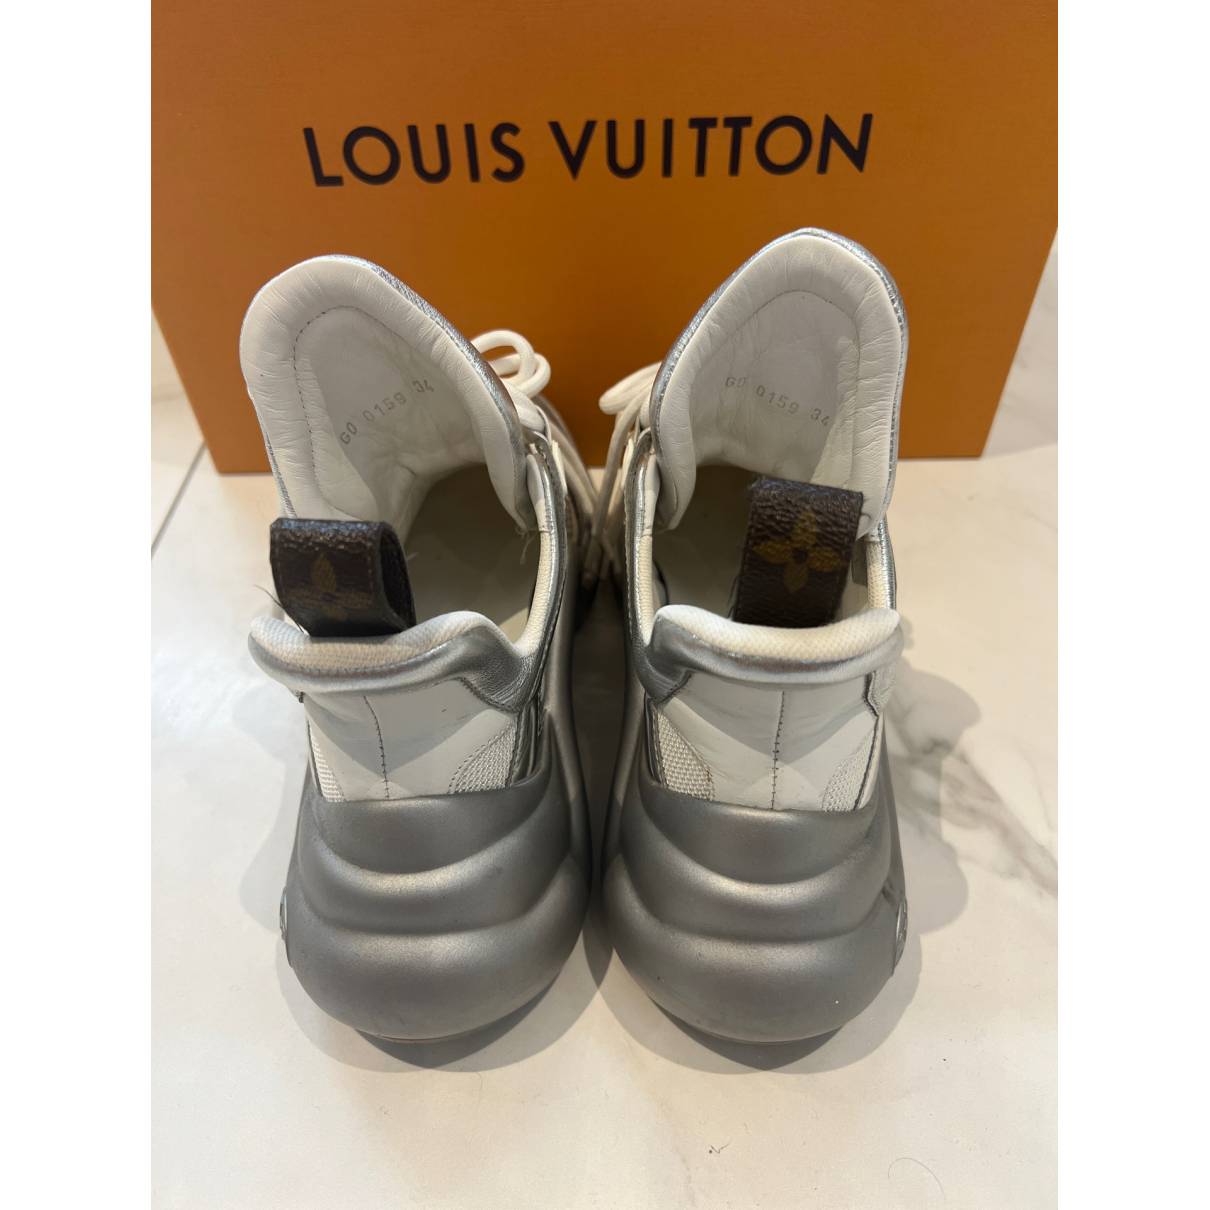 Louis Vuitton - Authenticated Archlight Trainer - Cloth White for Women, Very Good Condition